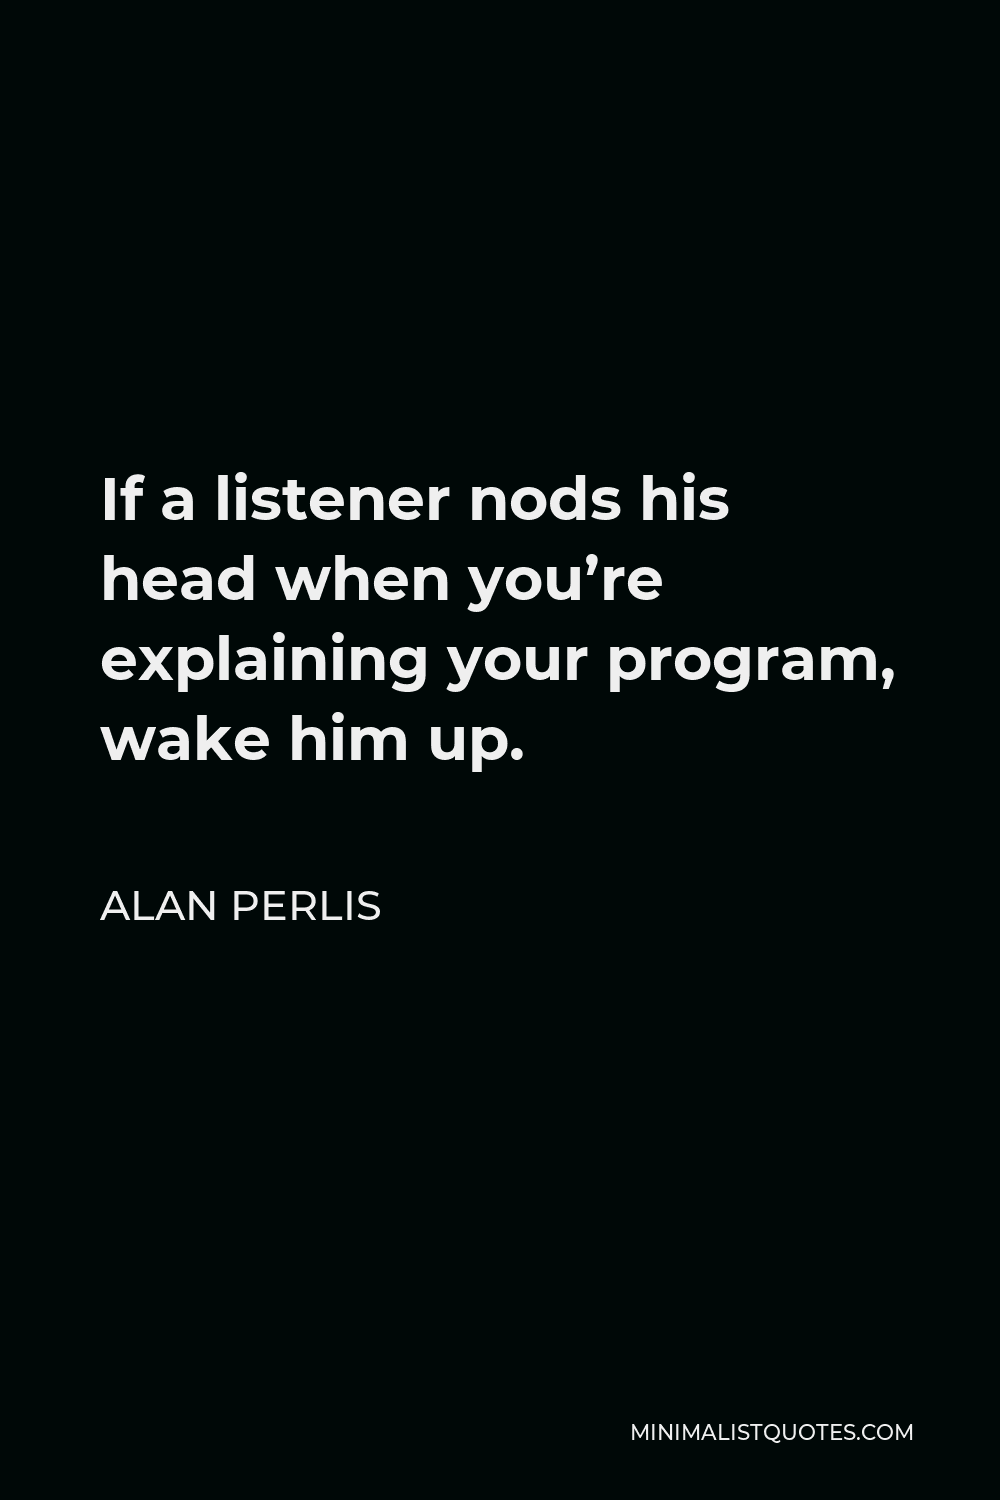 Alan Perlis Quote - If a listener nods his head when you’re explaining your program, wake him up.